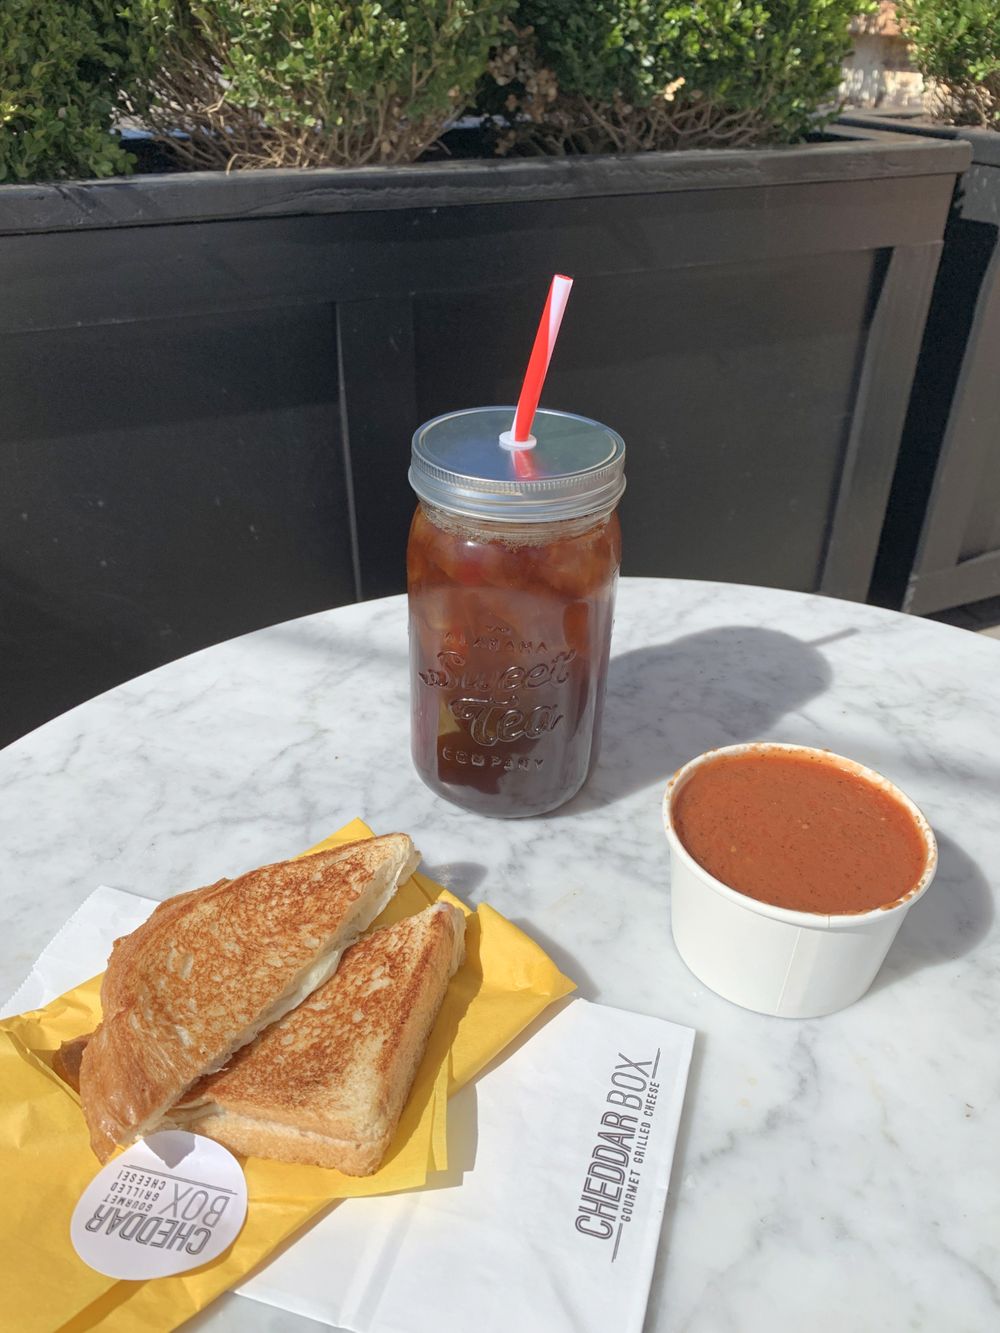 Grilled Cheese and Tomato Soup Lunch time at Magnolia Market